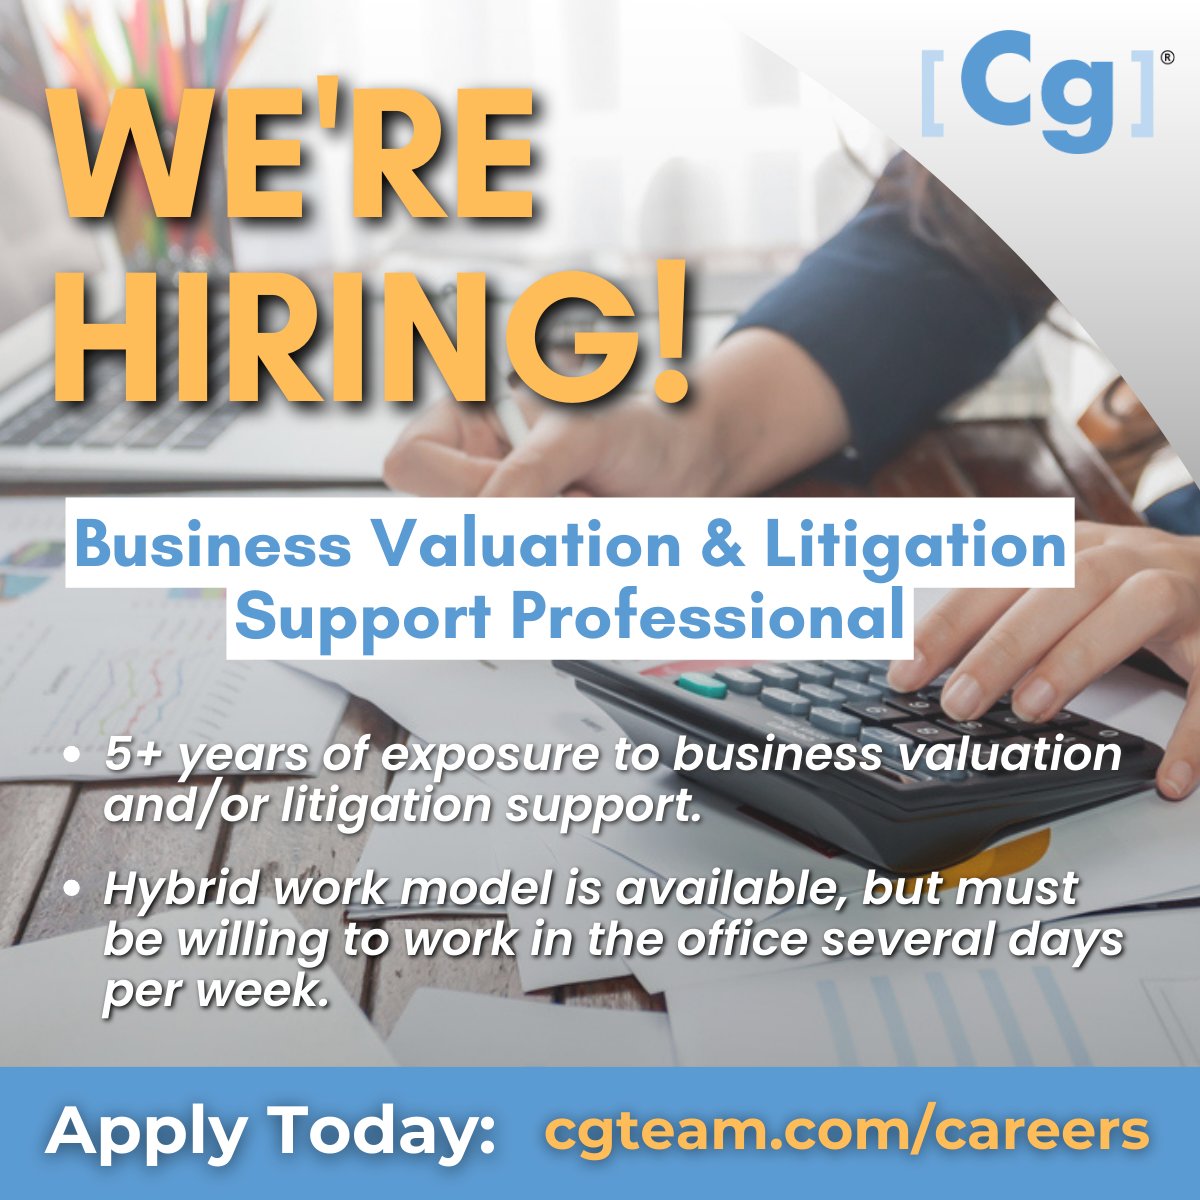 Join the Cg Litigation & Valuation Services Group! We're looking for a candidate with 5+ years exposure or experience in business valuation and litigation support. Learn more: bit.ly/2PhstUL #hiring #careers #litigation #businessvaluation #forensicaccounting #account ...